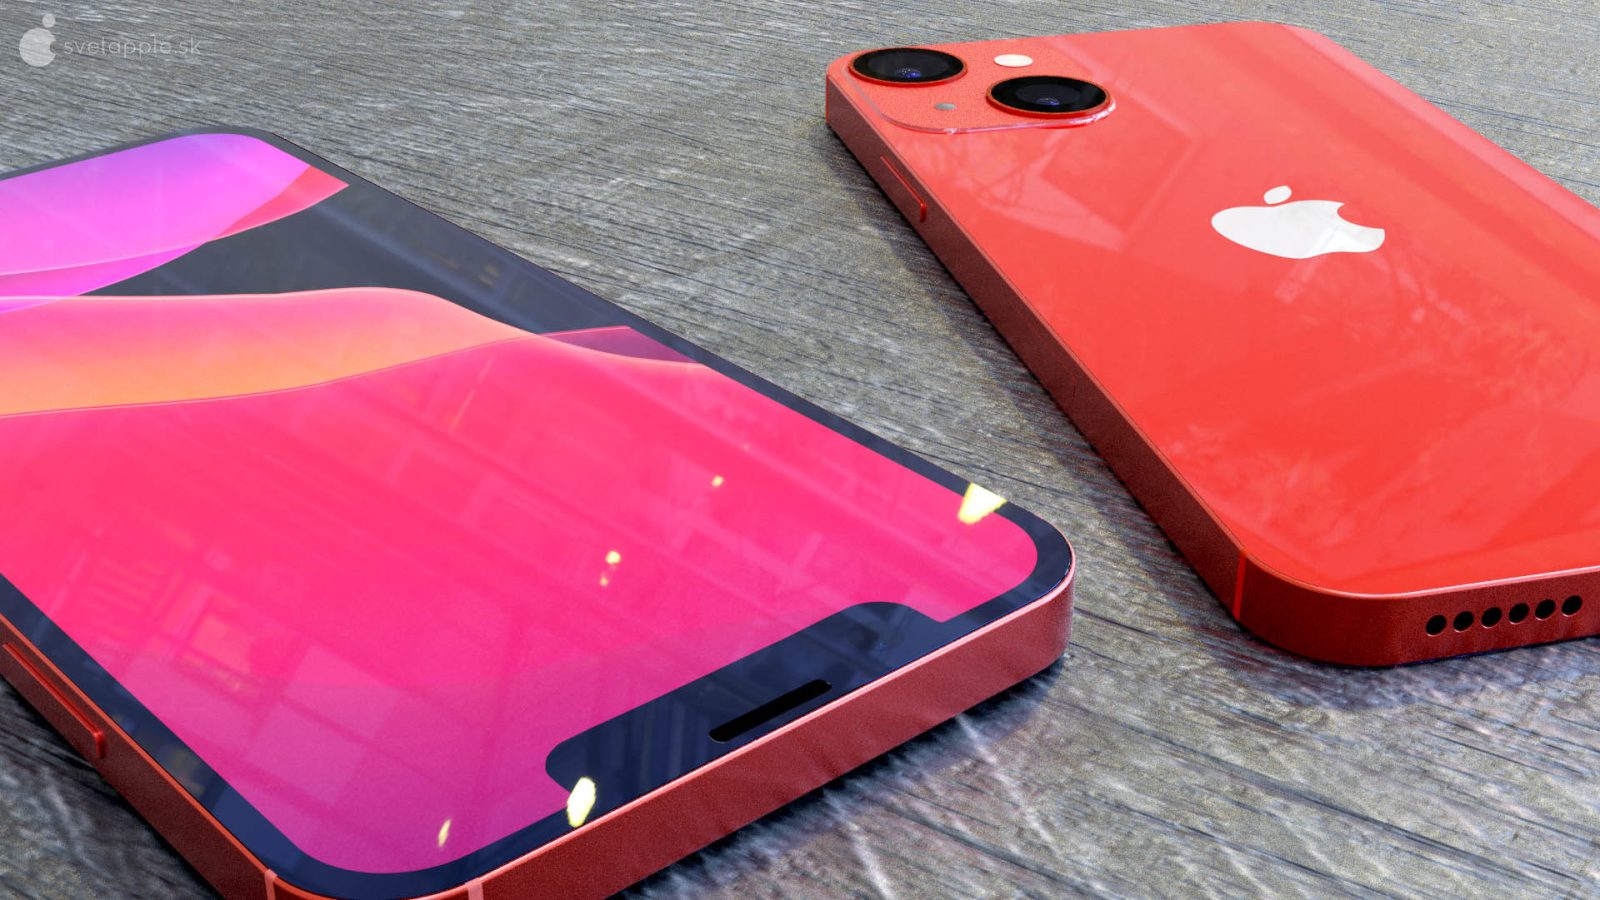 Apple Leaker Claims iPhone 13 Is Coming In Pink